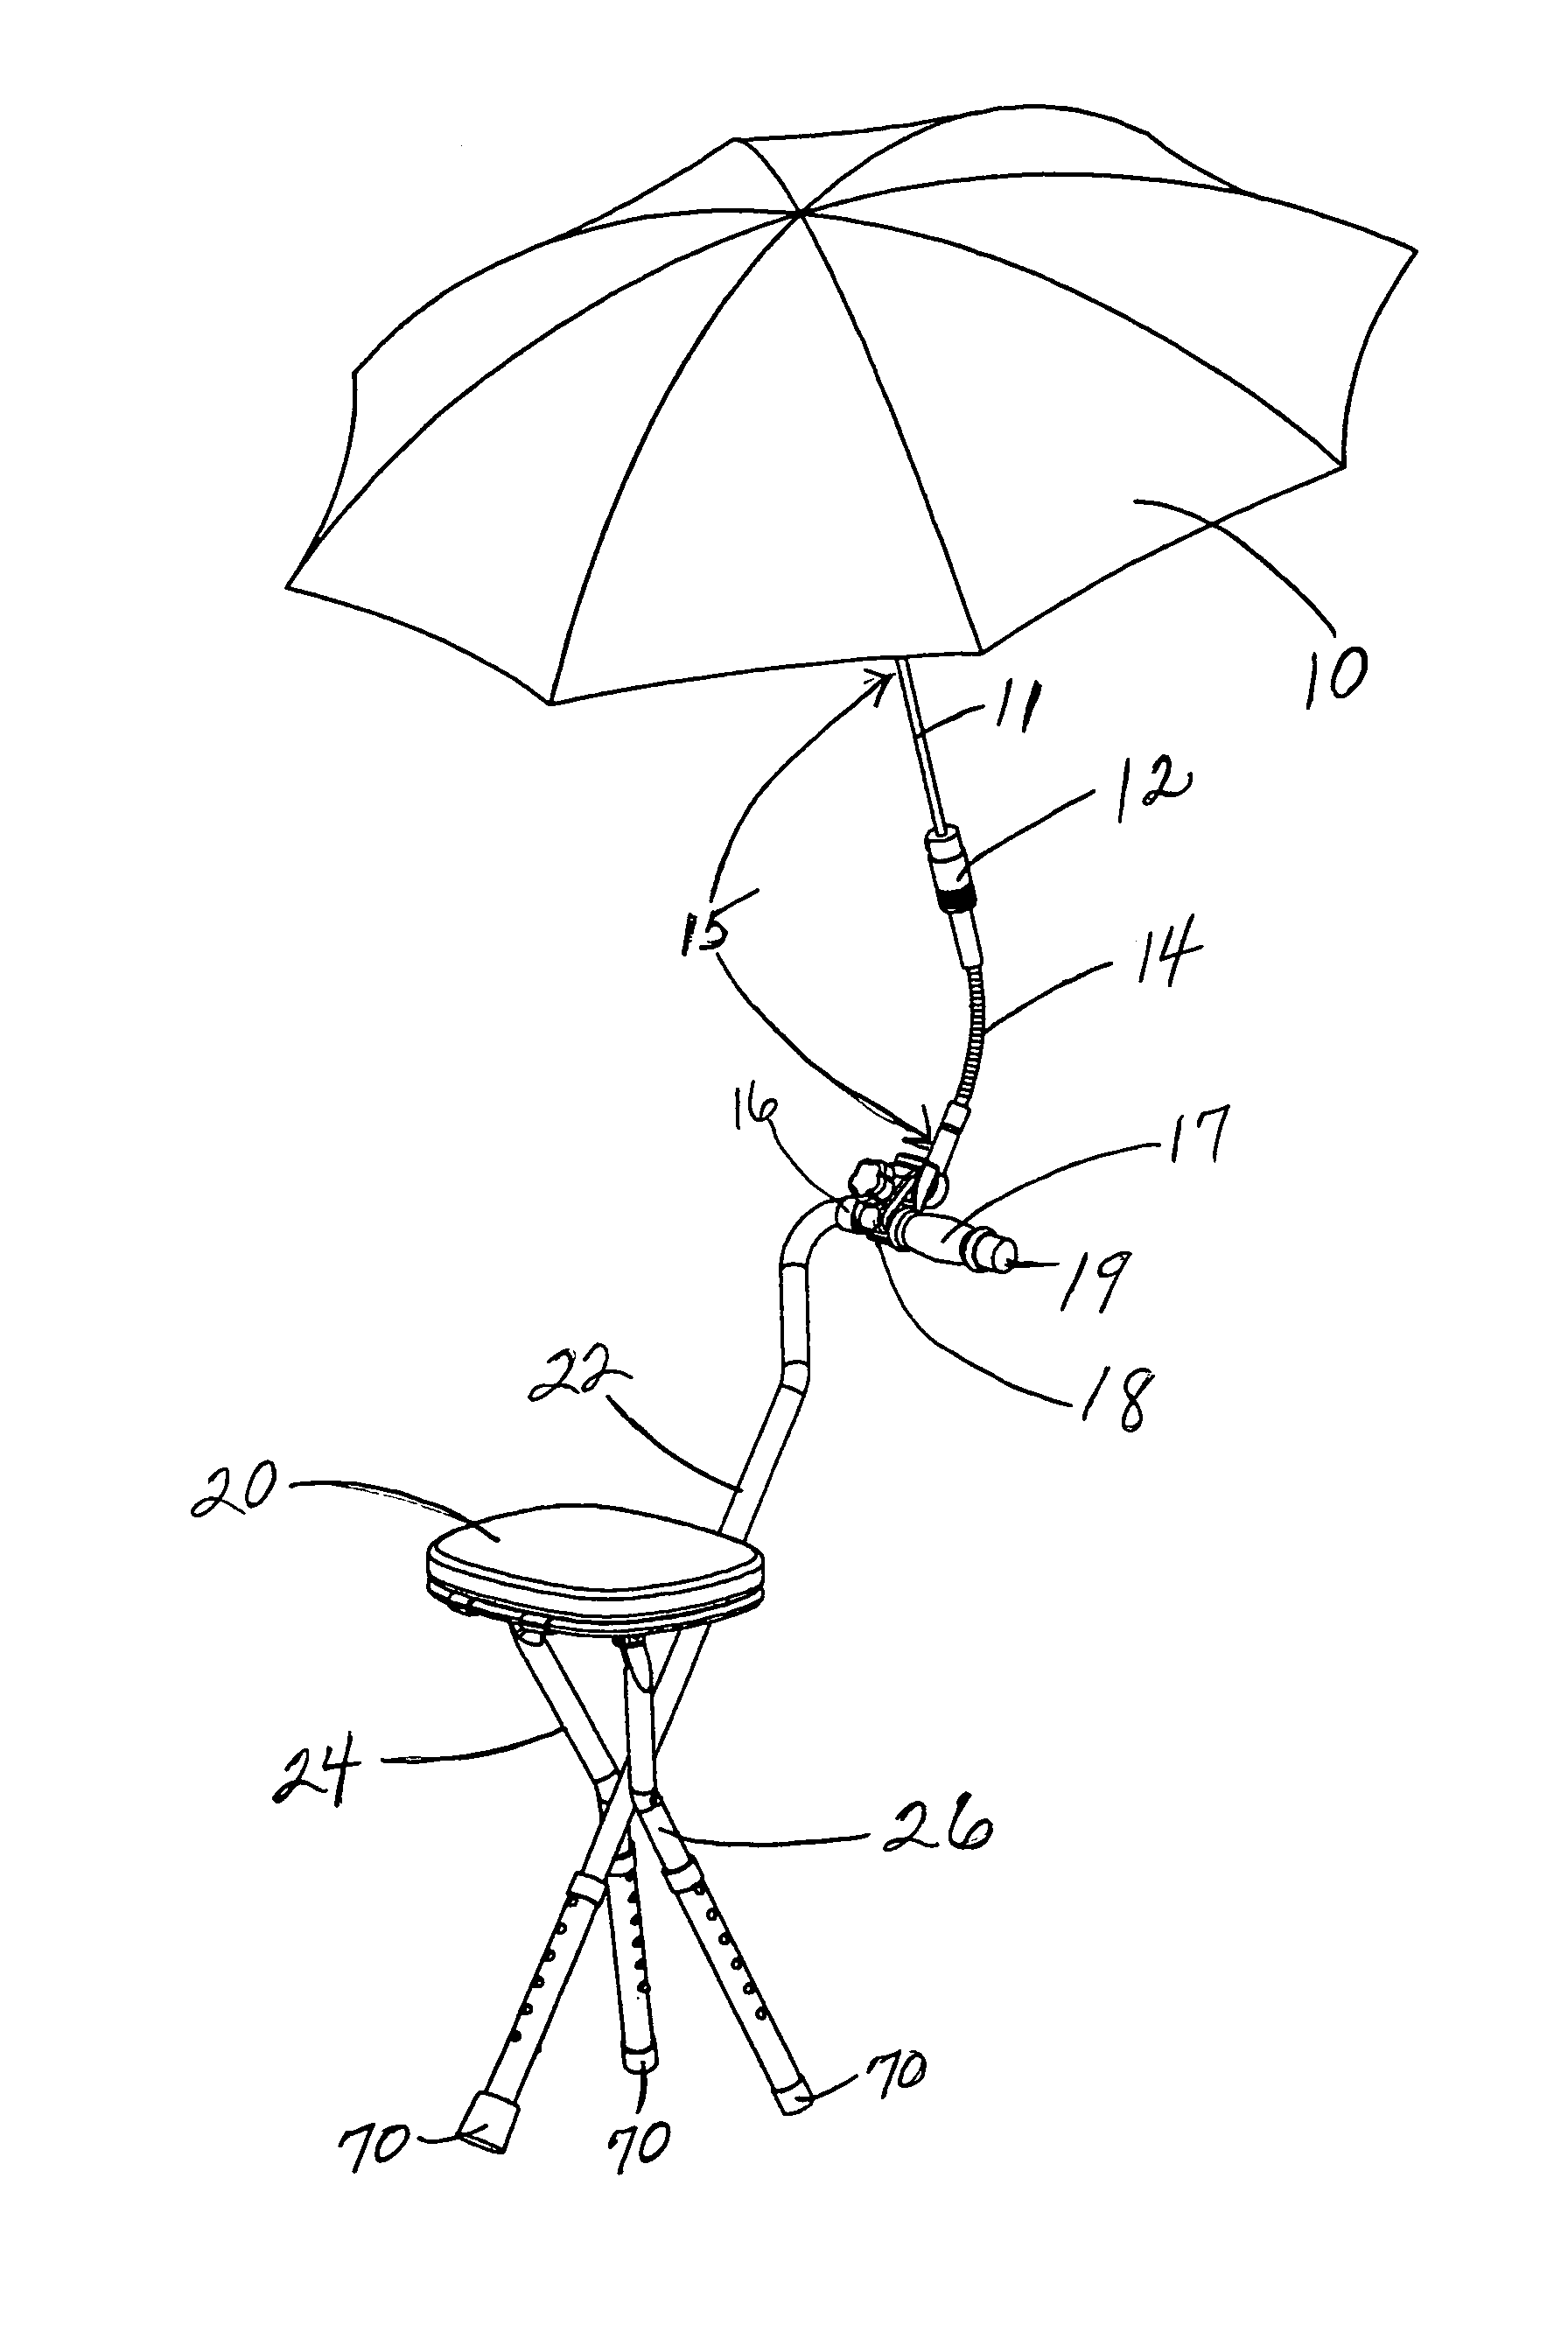 Portable chair and cane with umbrella